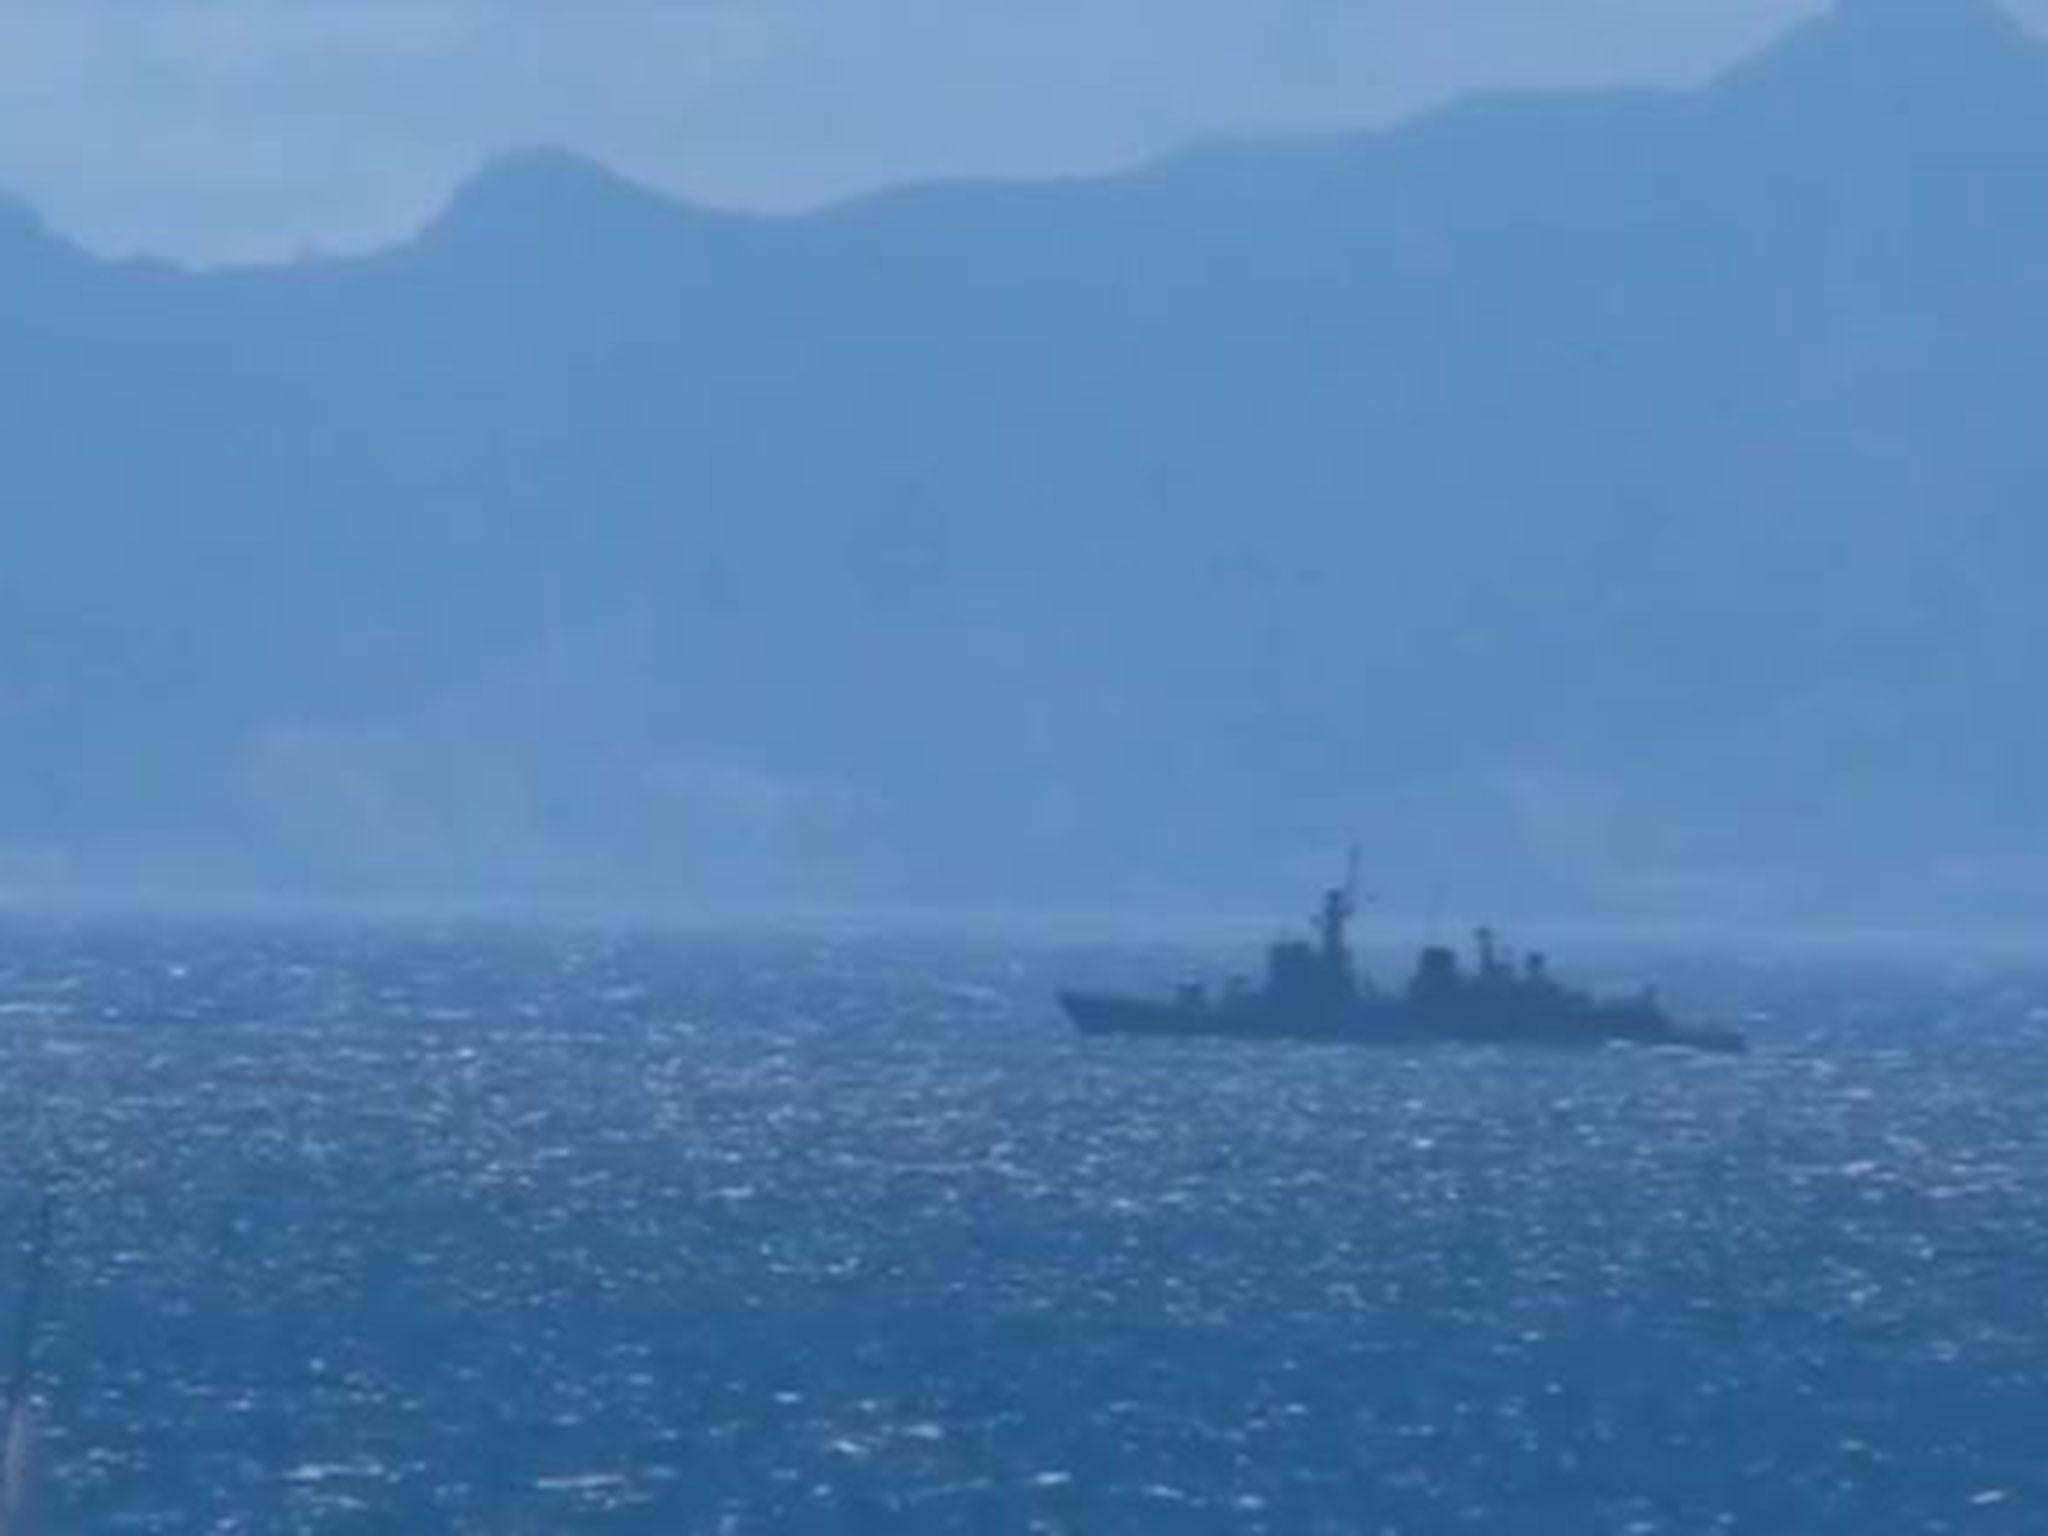 Spanish navy vessels have entered Gibraltar's territorial waters on three occasions in April